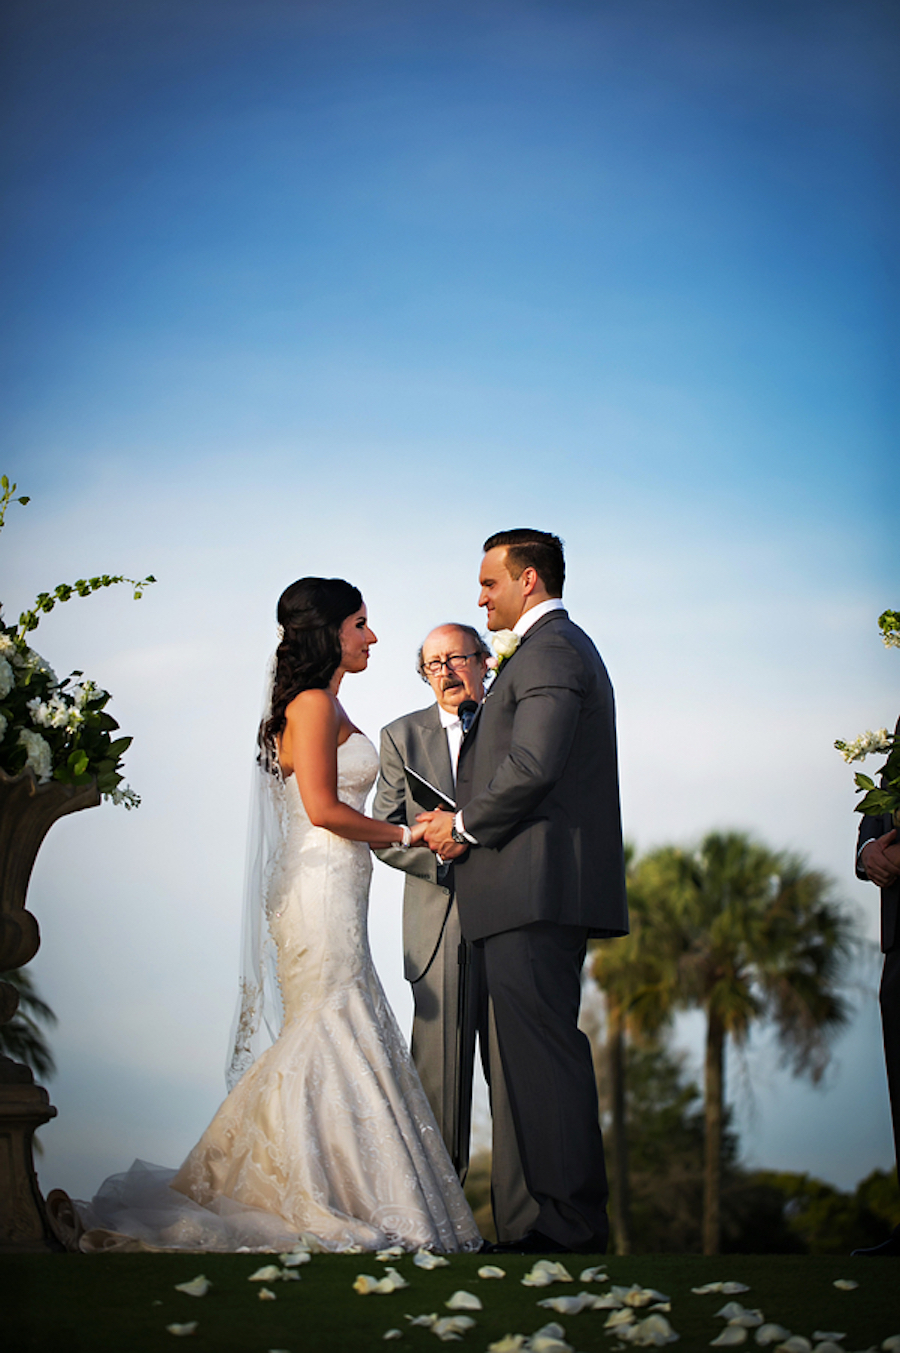 Outdoor Golf Course Wedding Ceremony | Clearwater Wedding Venue Countryside Country Club